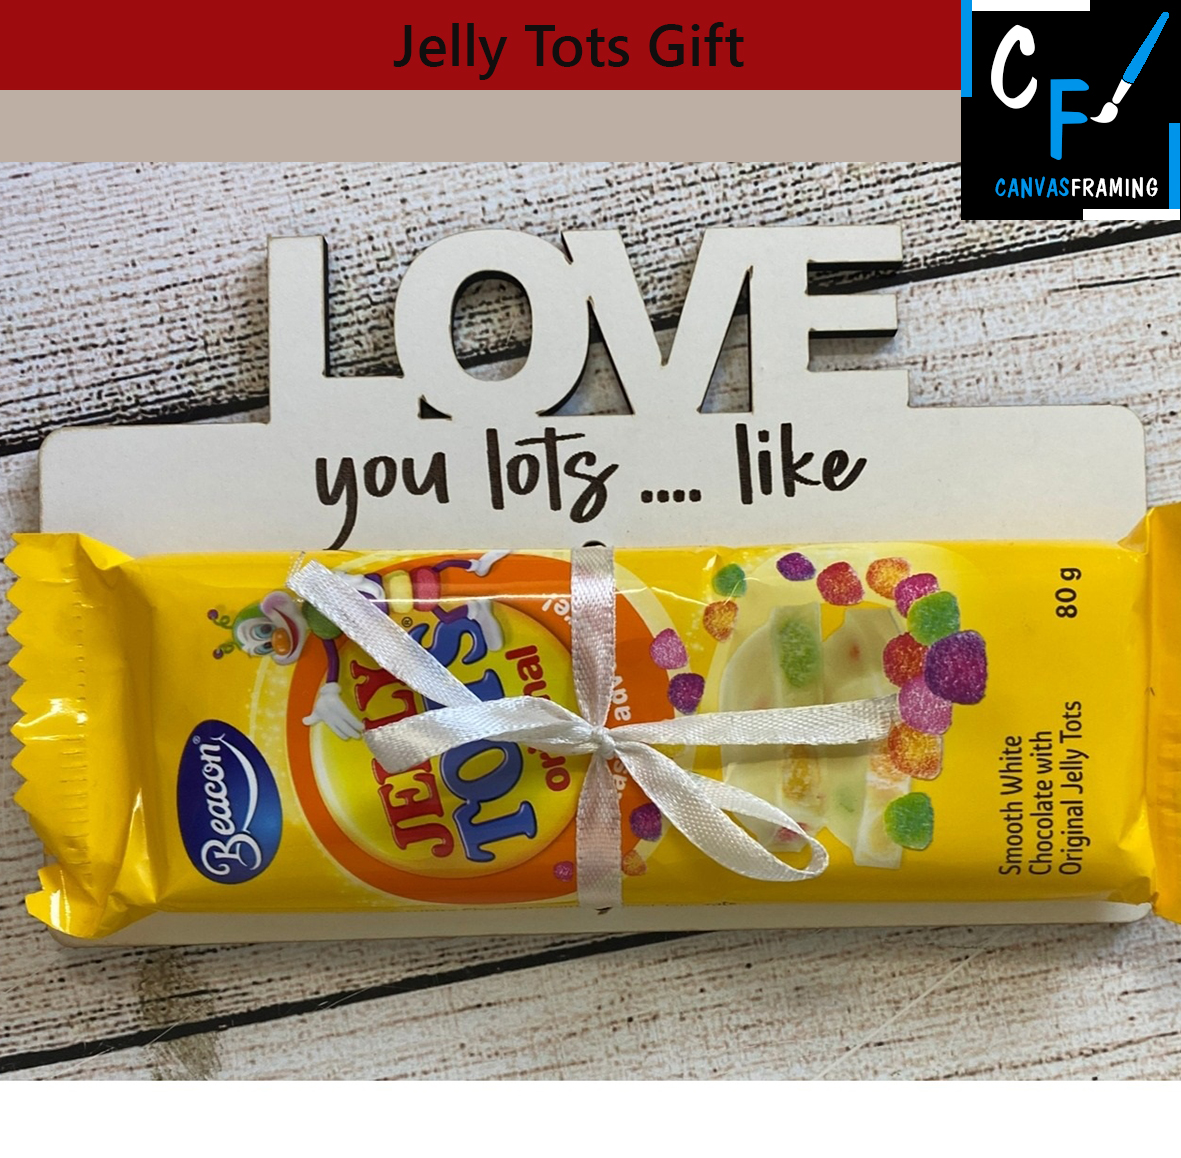 Jelly Tots Gift